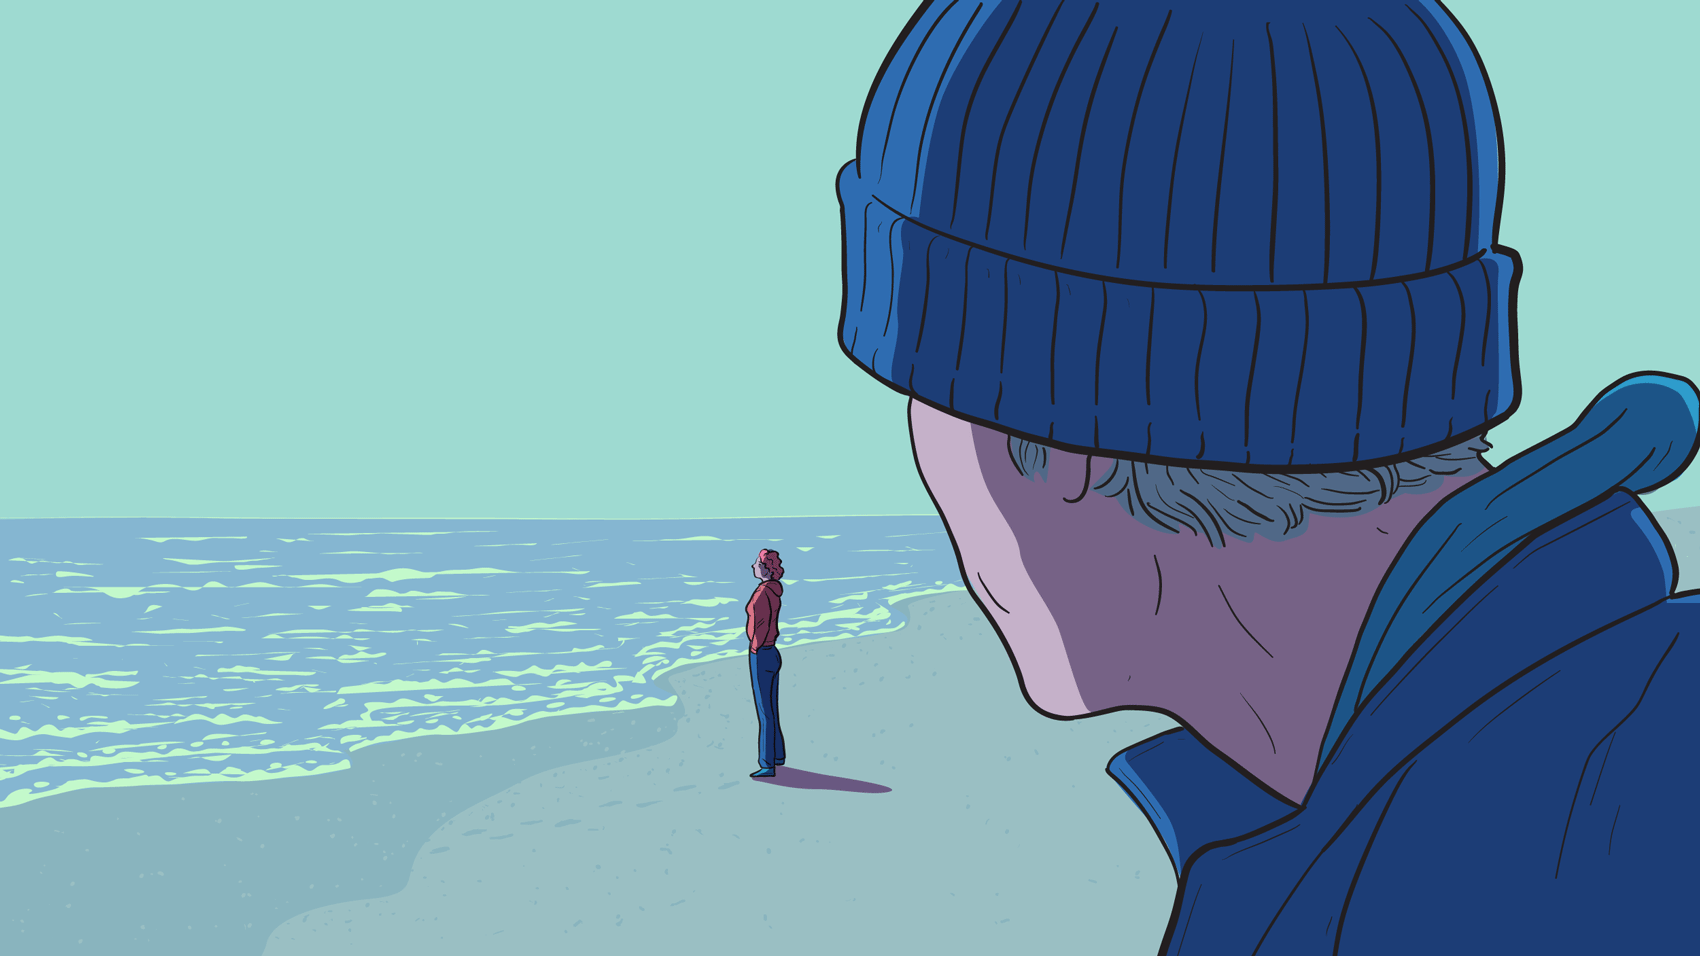 Person looking towards a flickering figure on a beach